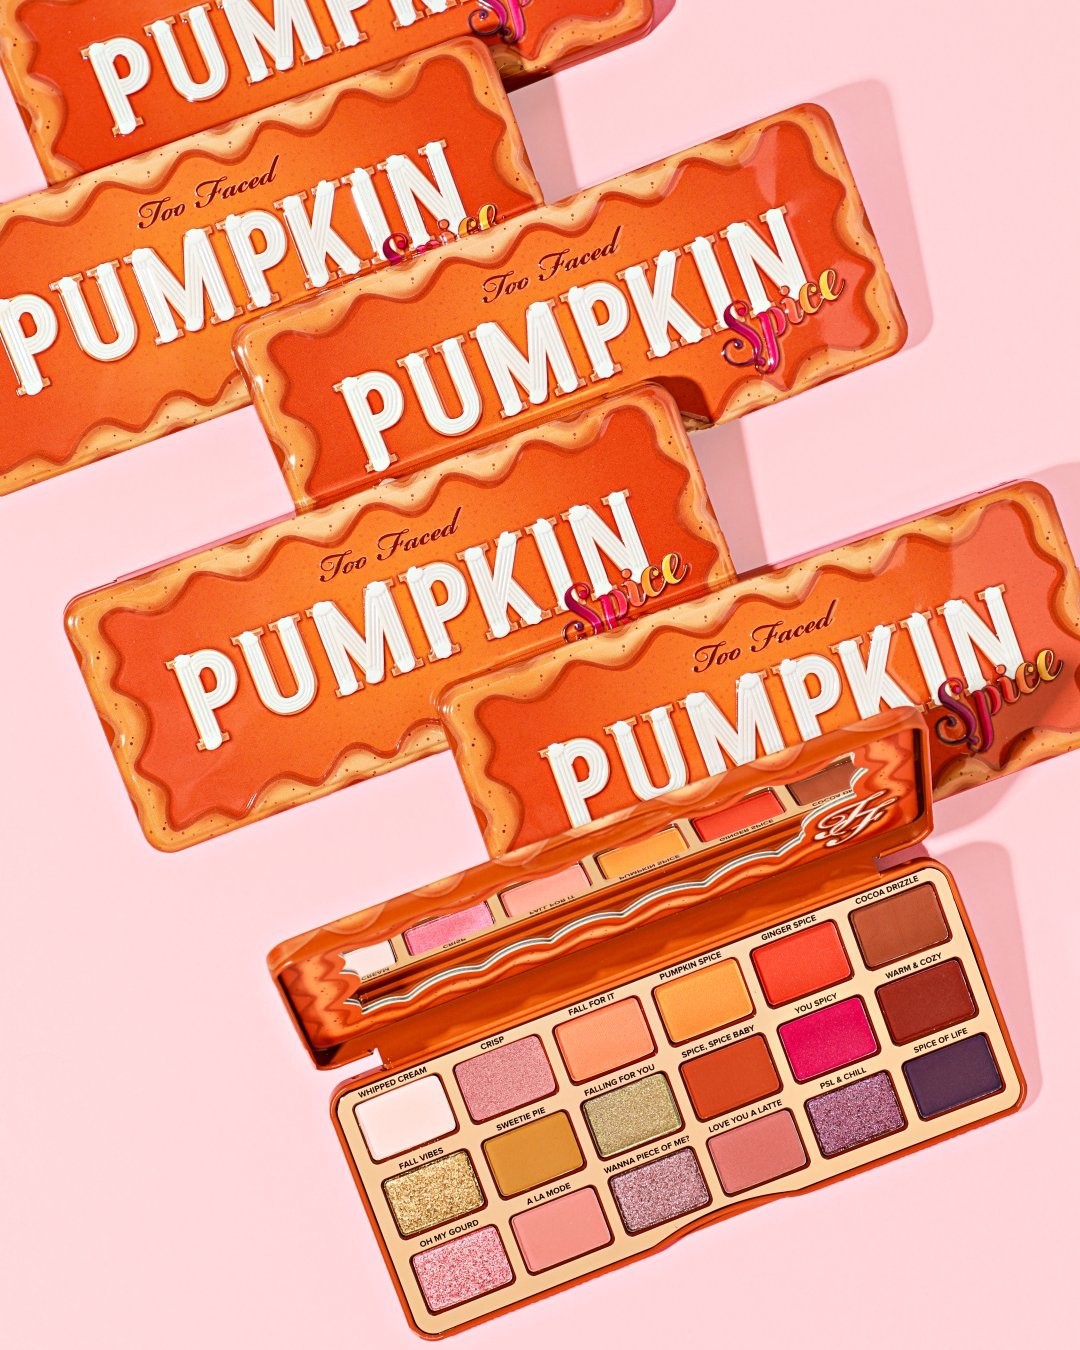 Too Faced Cosmetics - BRB, we’re having a pumpkin spice moment. ✨ Spice up your shadow collection with our Pumpkin Spice Eye Shadow Palette that smells as good as it looks! 🥧 Stock up @sephora #toofac...